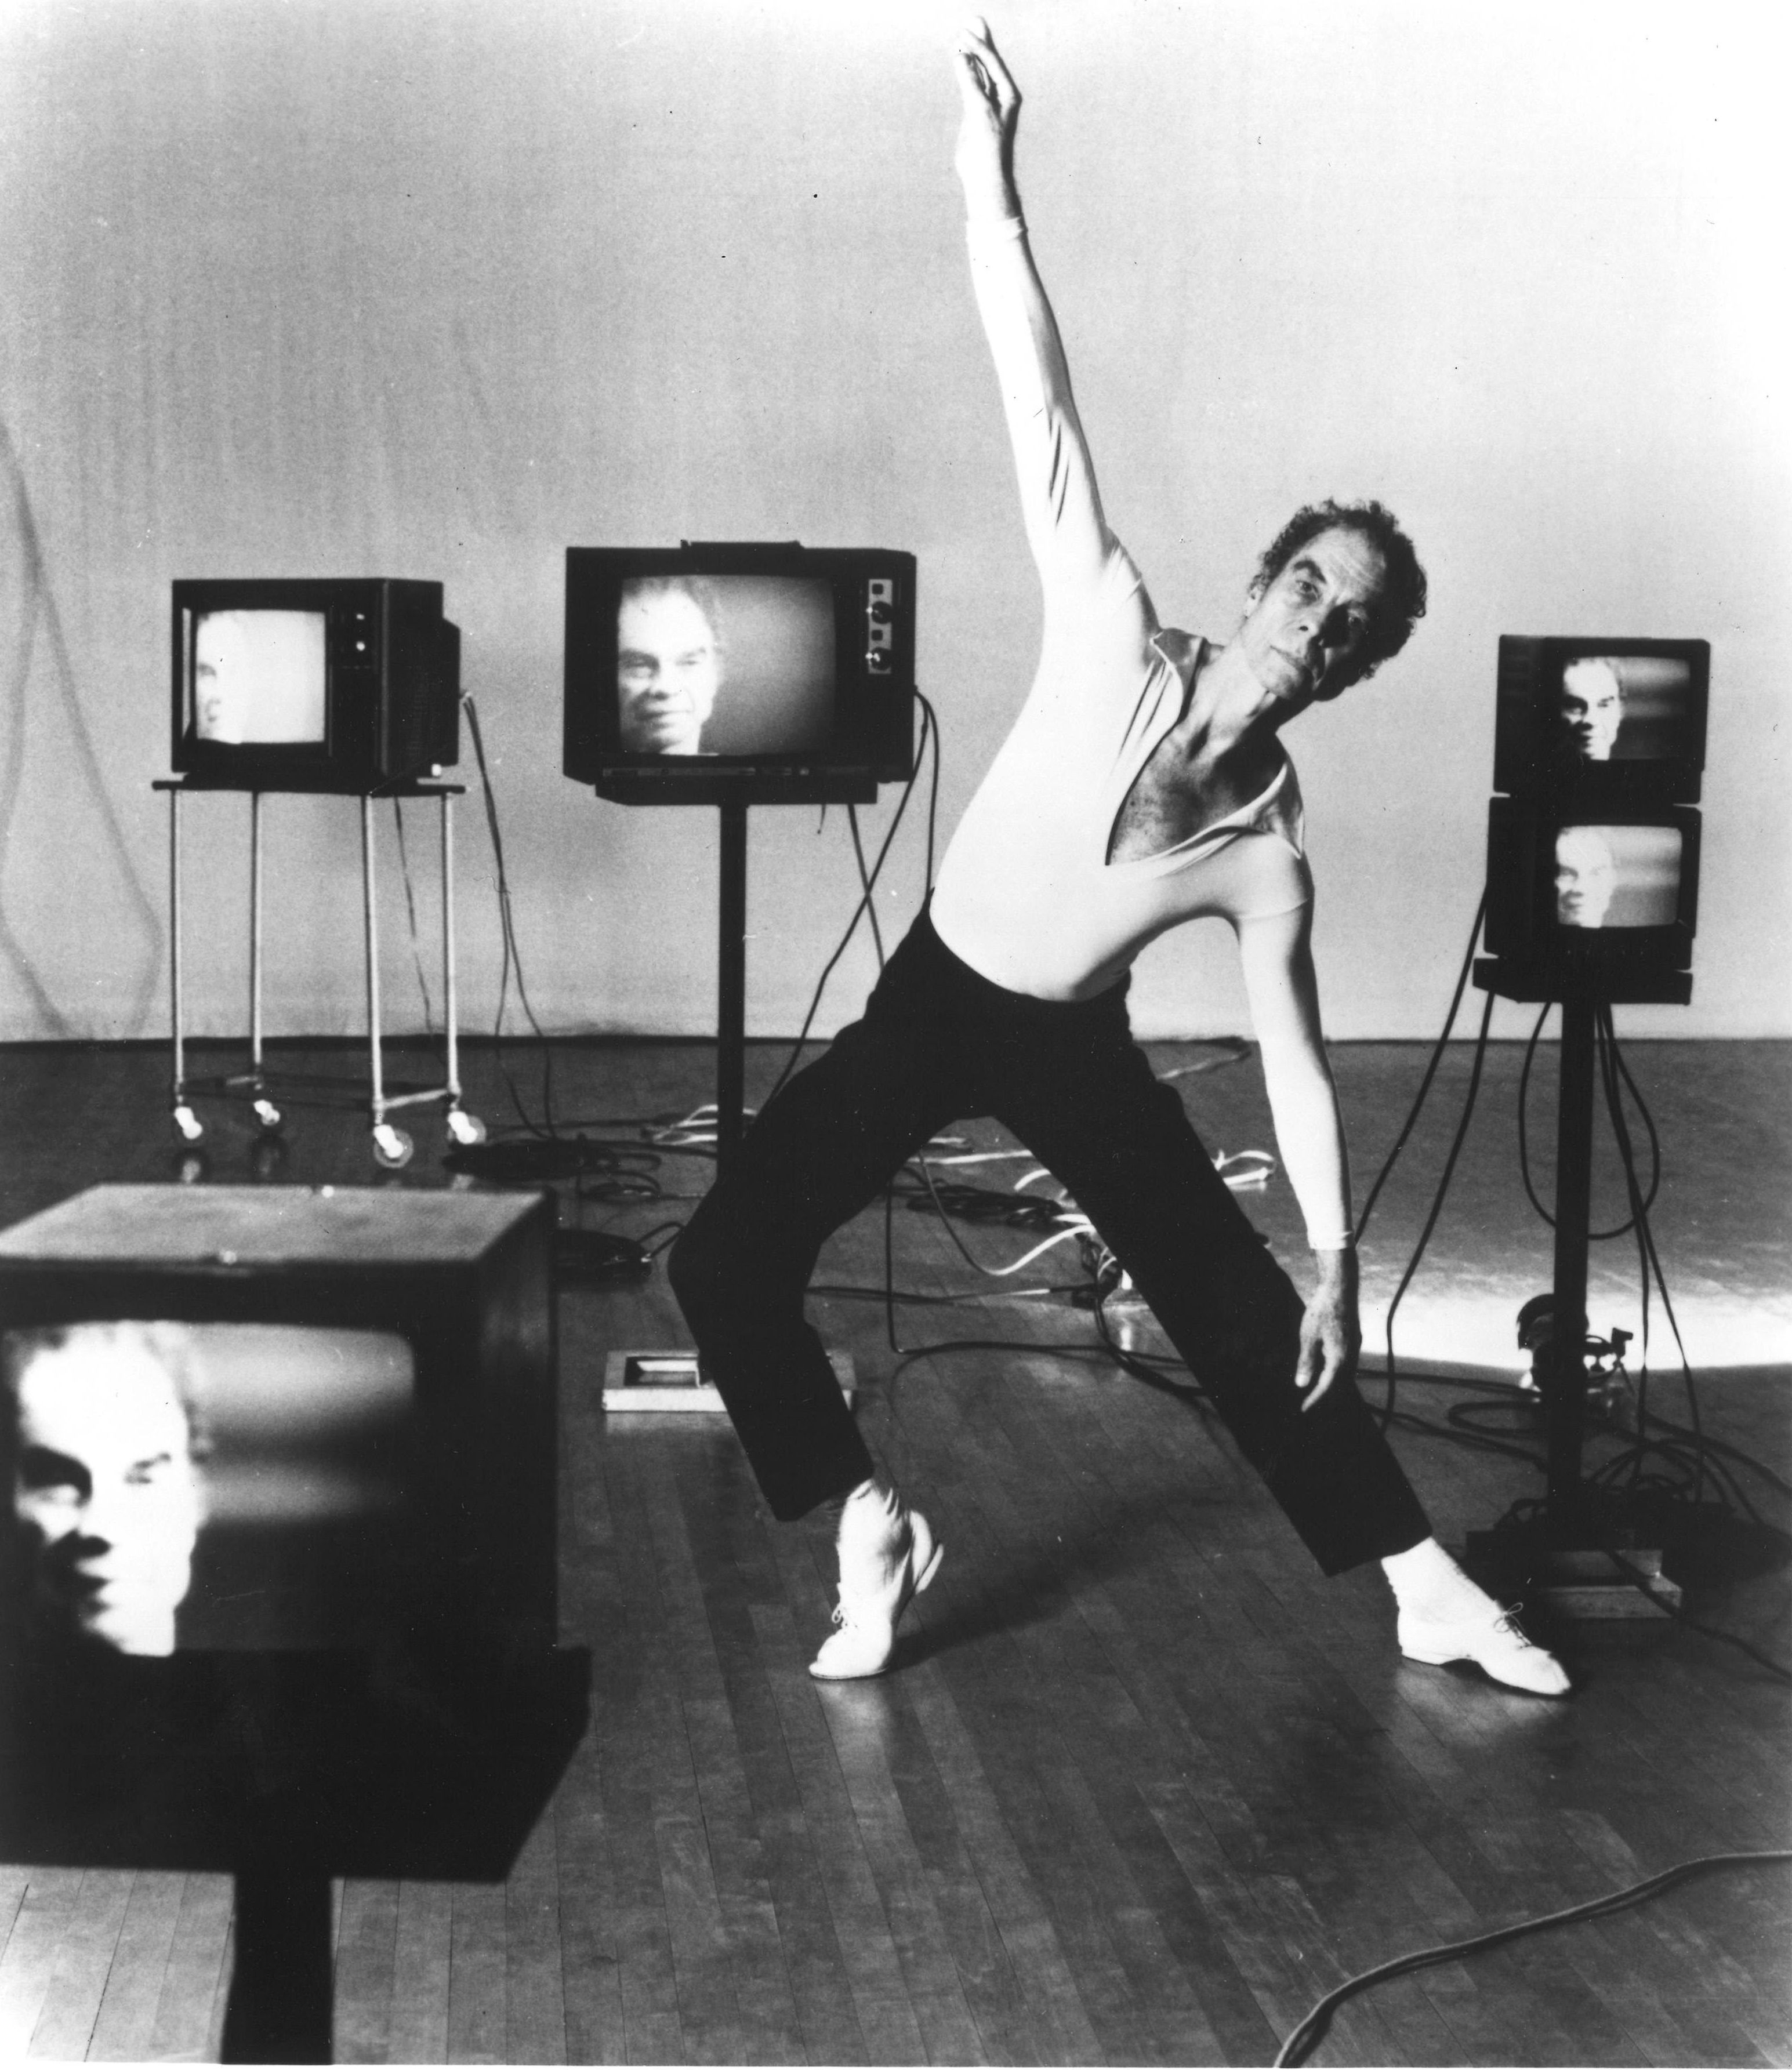 Five small, square television sets of various sizes show a blurry image of Merce Cunningham's face. Cunningham himself is in the middle of the seemingly random array, holding a side lunge with his right arm raised and right foot in forced arch.